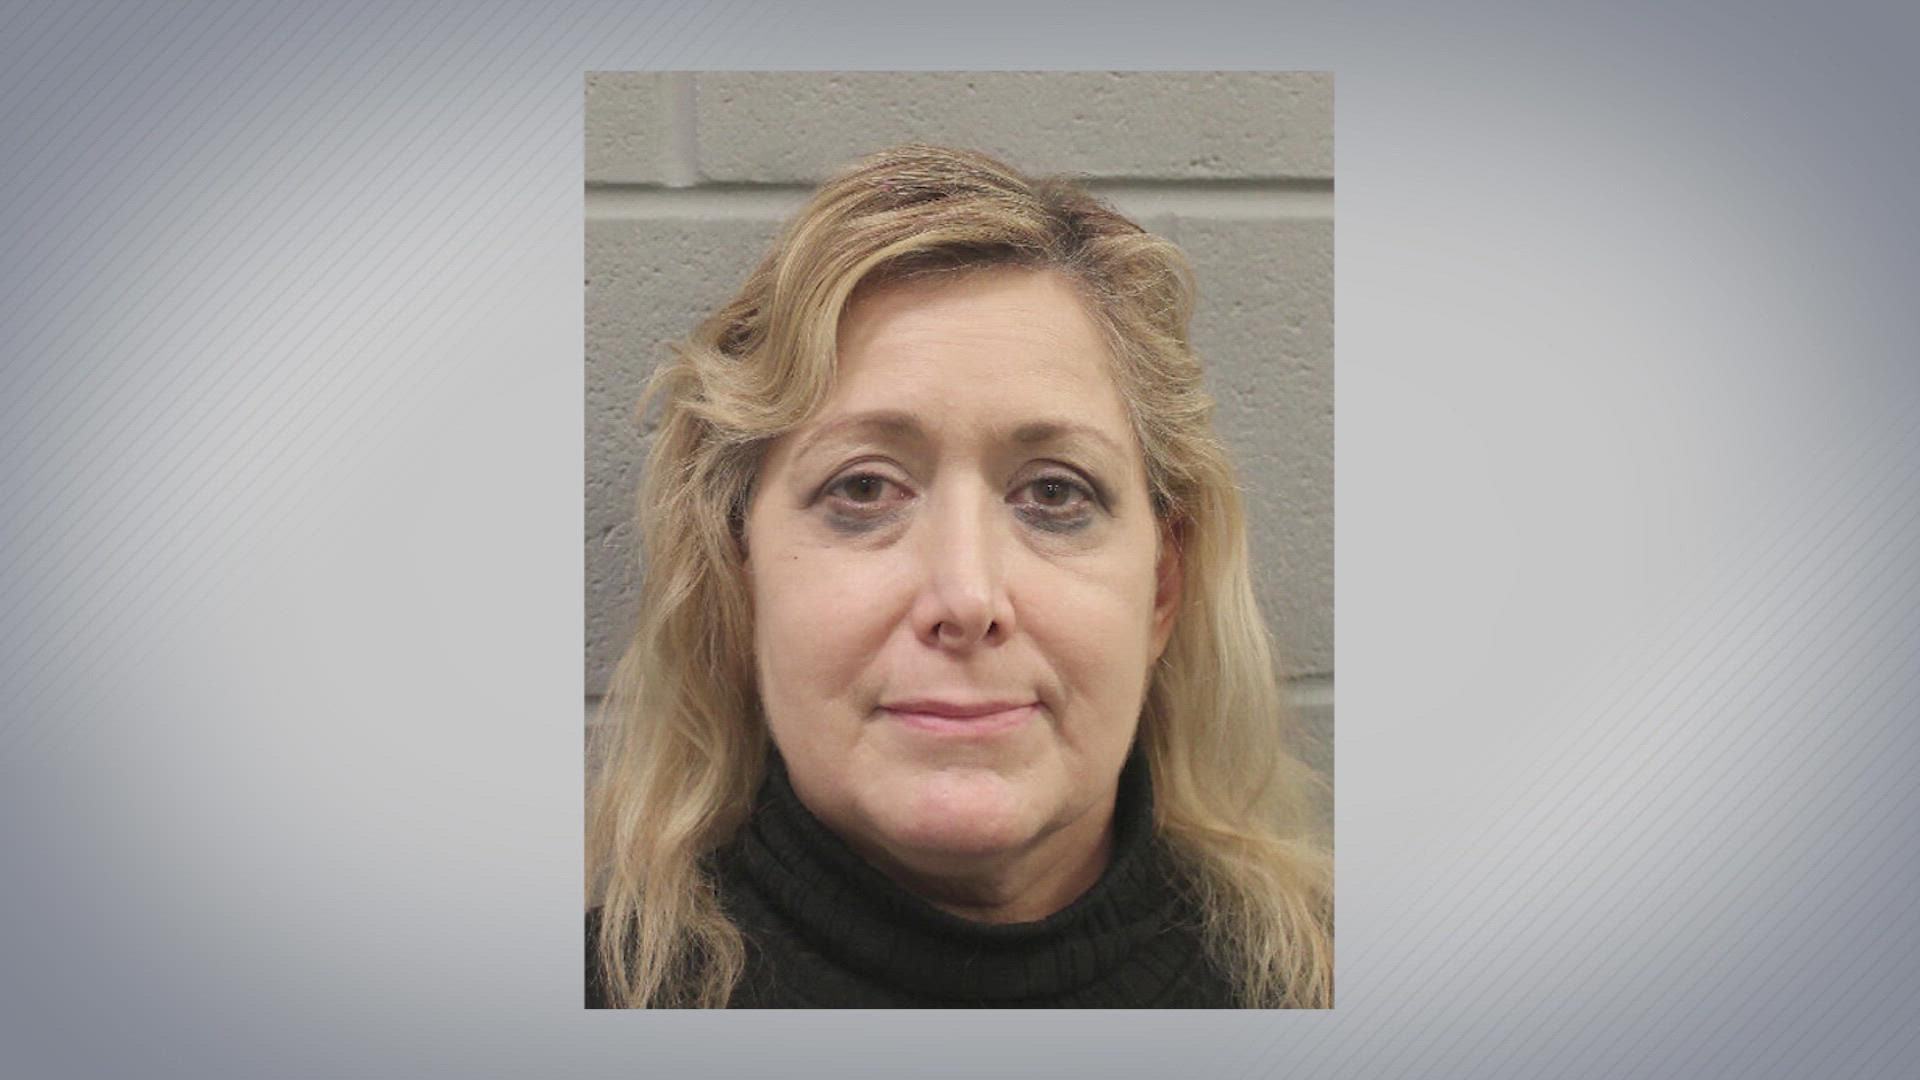 Lisa Marie Coleman. 58, has been charged with three counts of robbery by threat and kidnapping. She faces more charges, including federal charges.